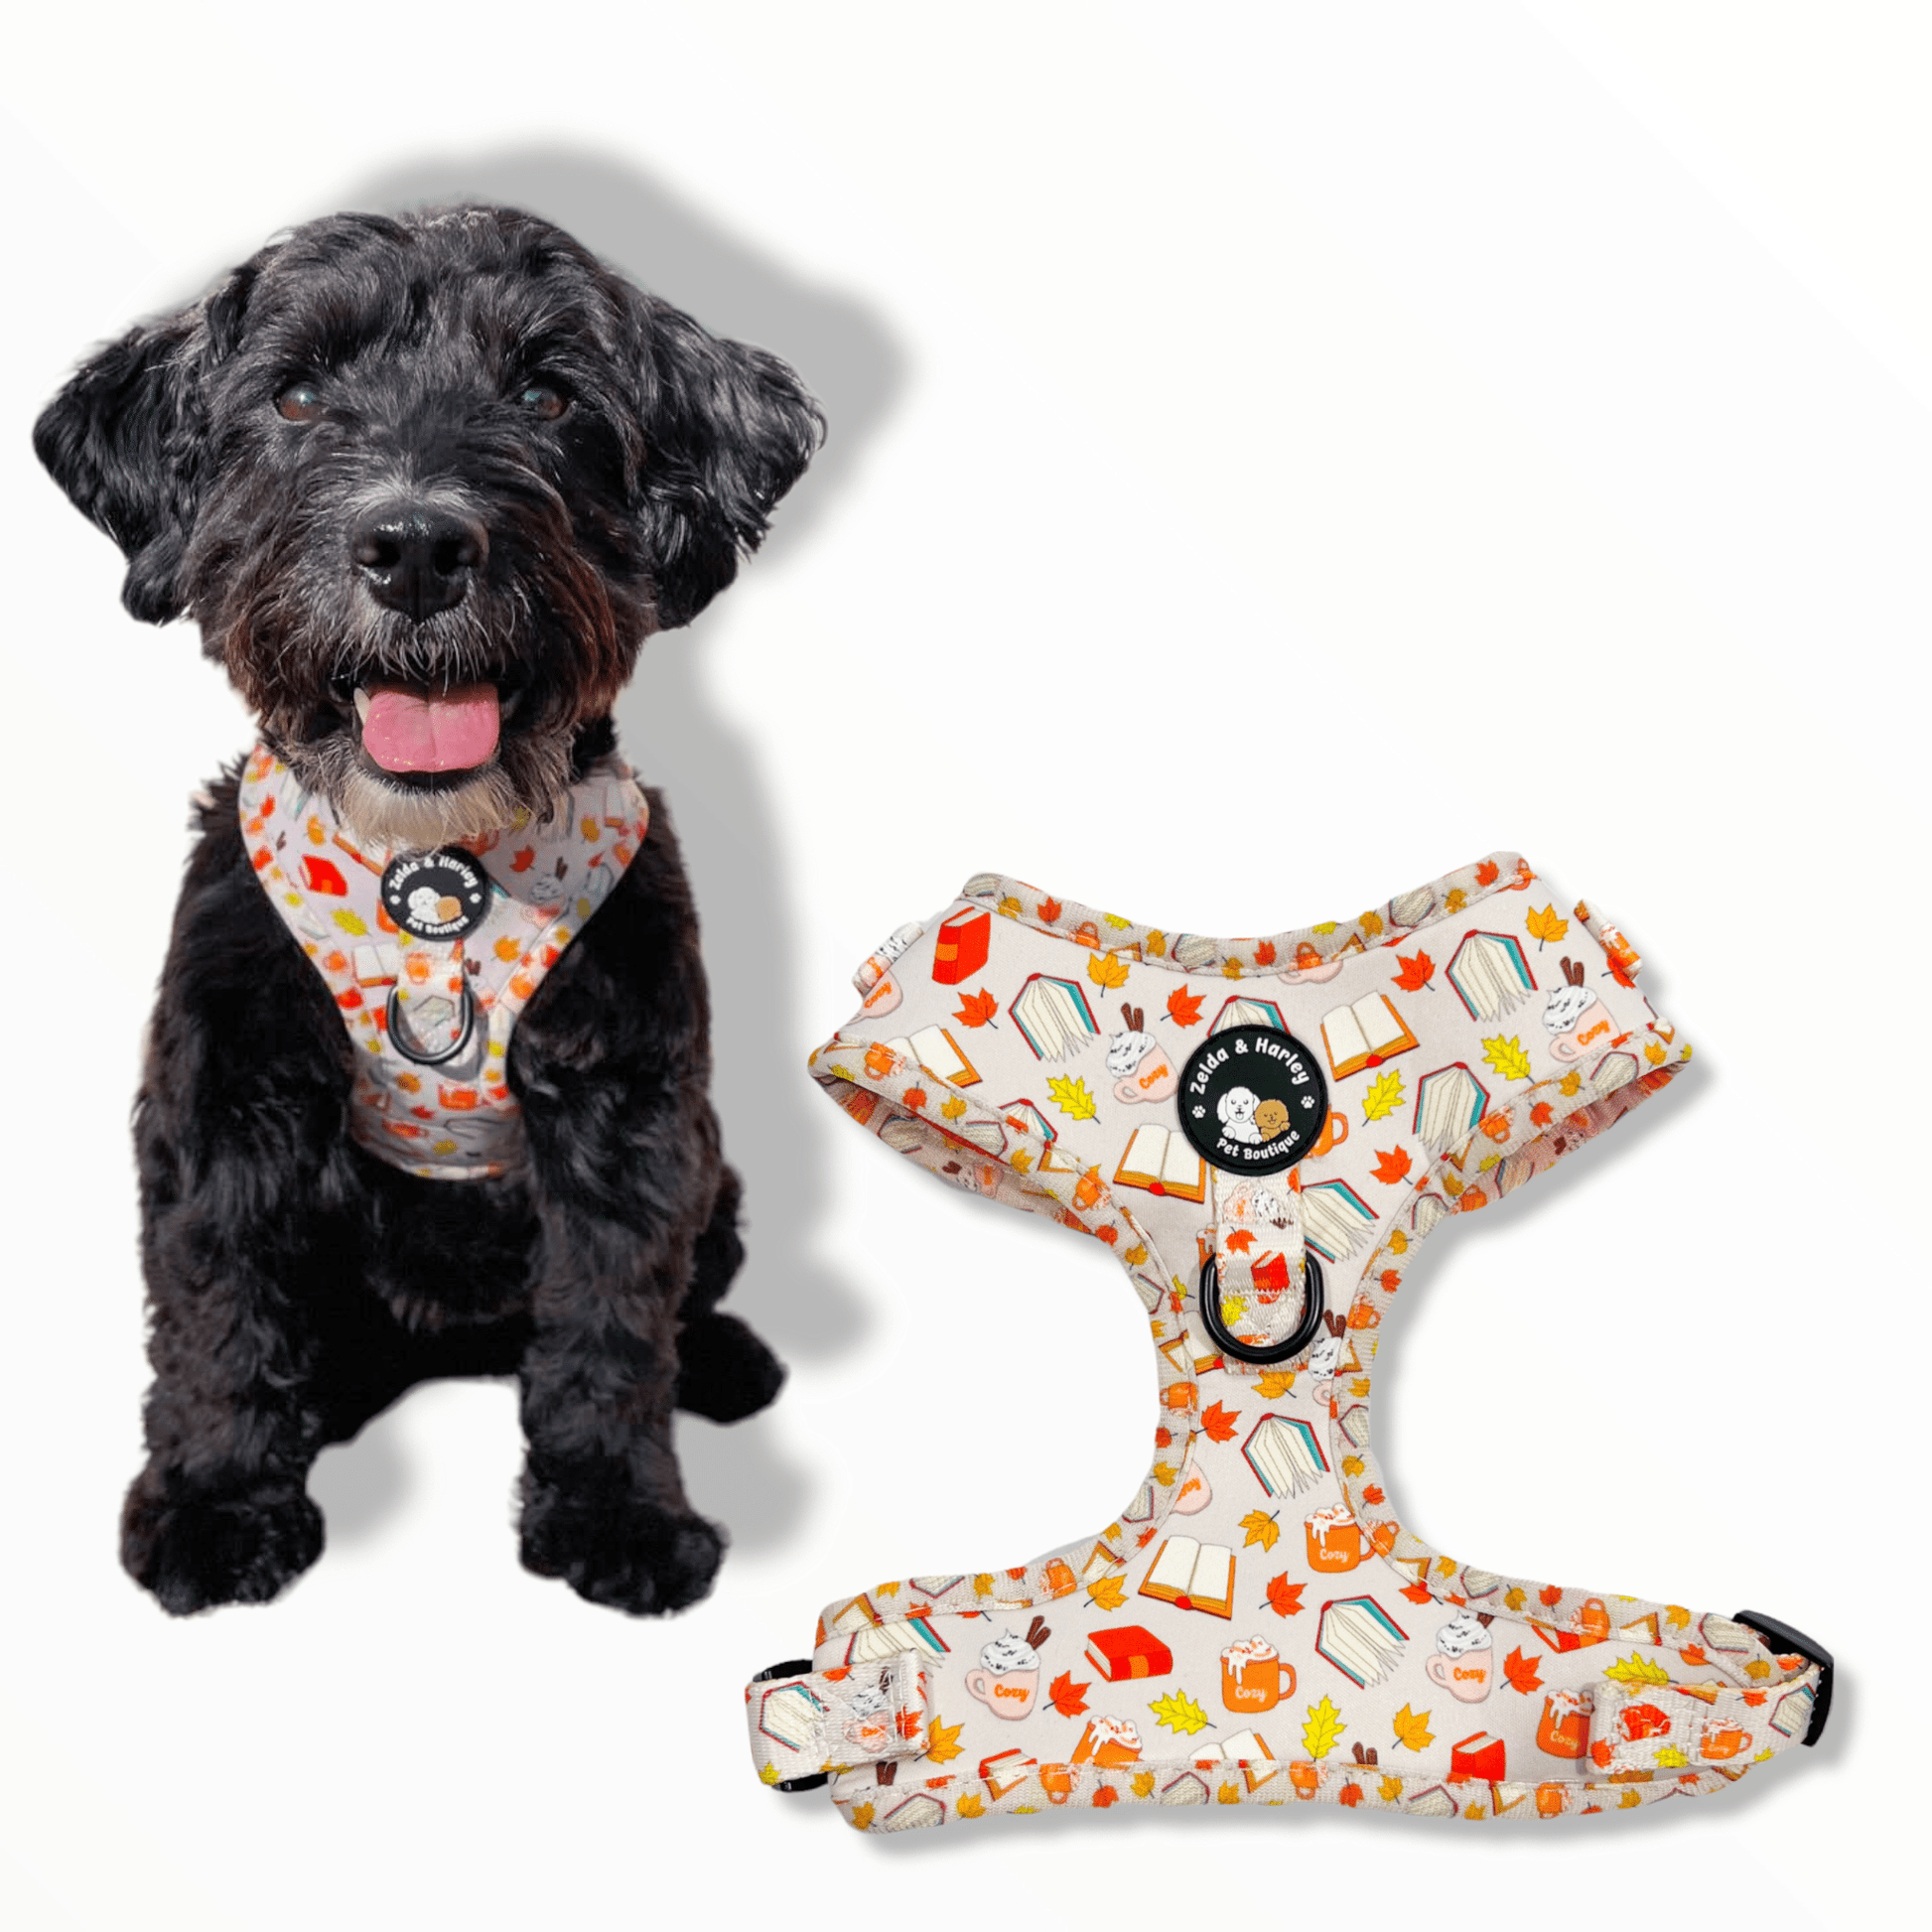 Hairy Pawter - No Pull Adjustable Dog Harness